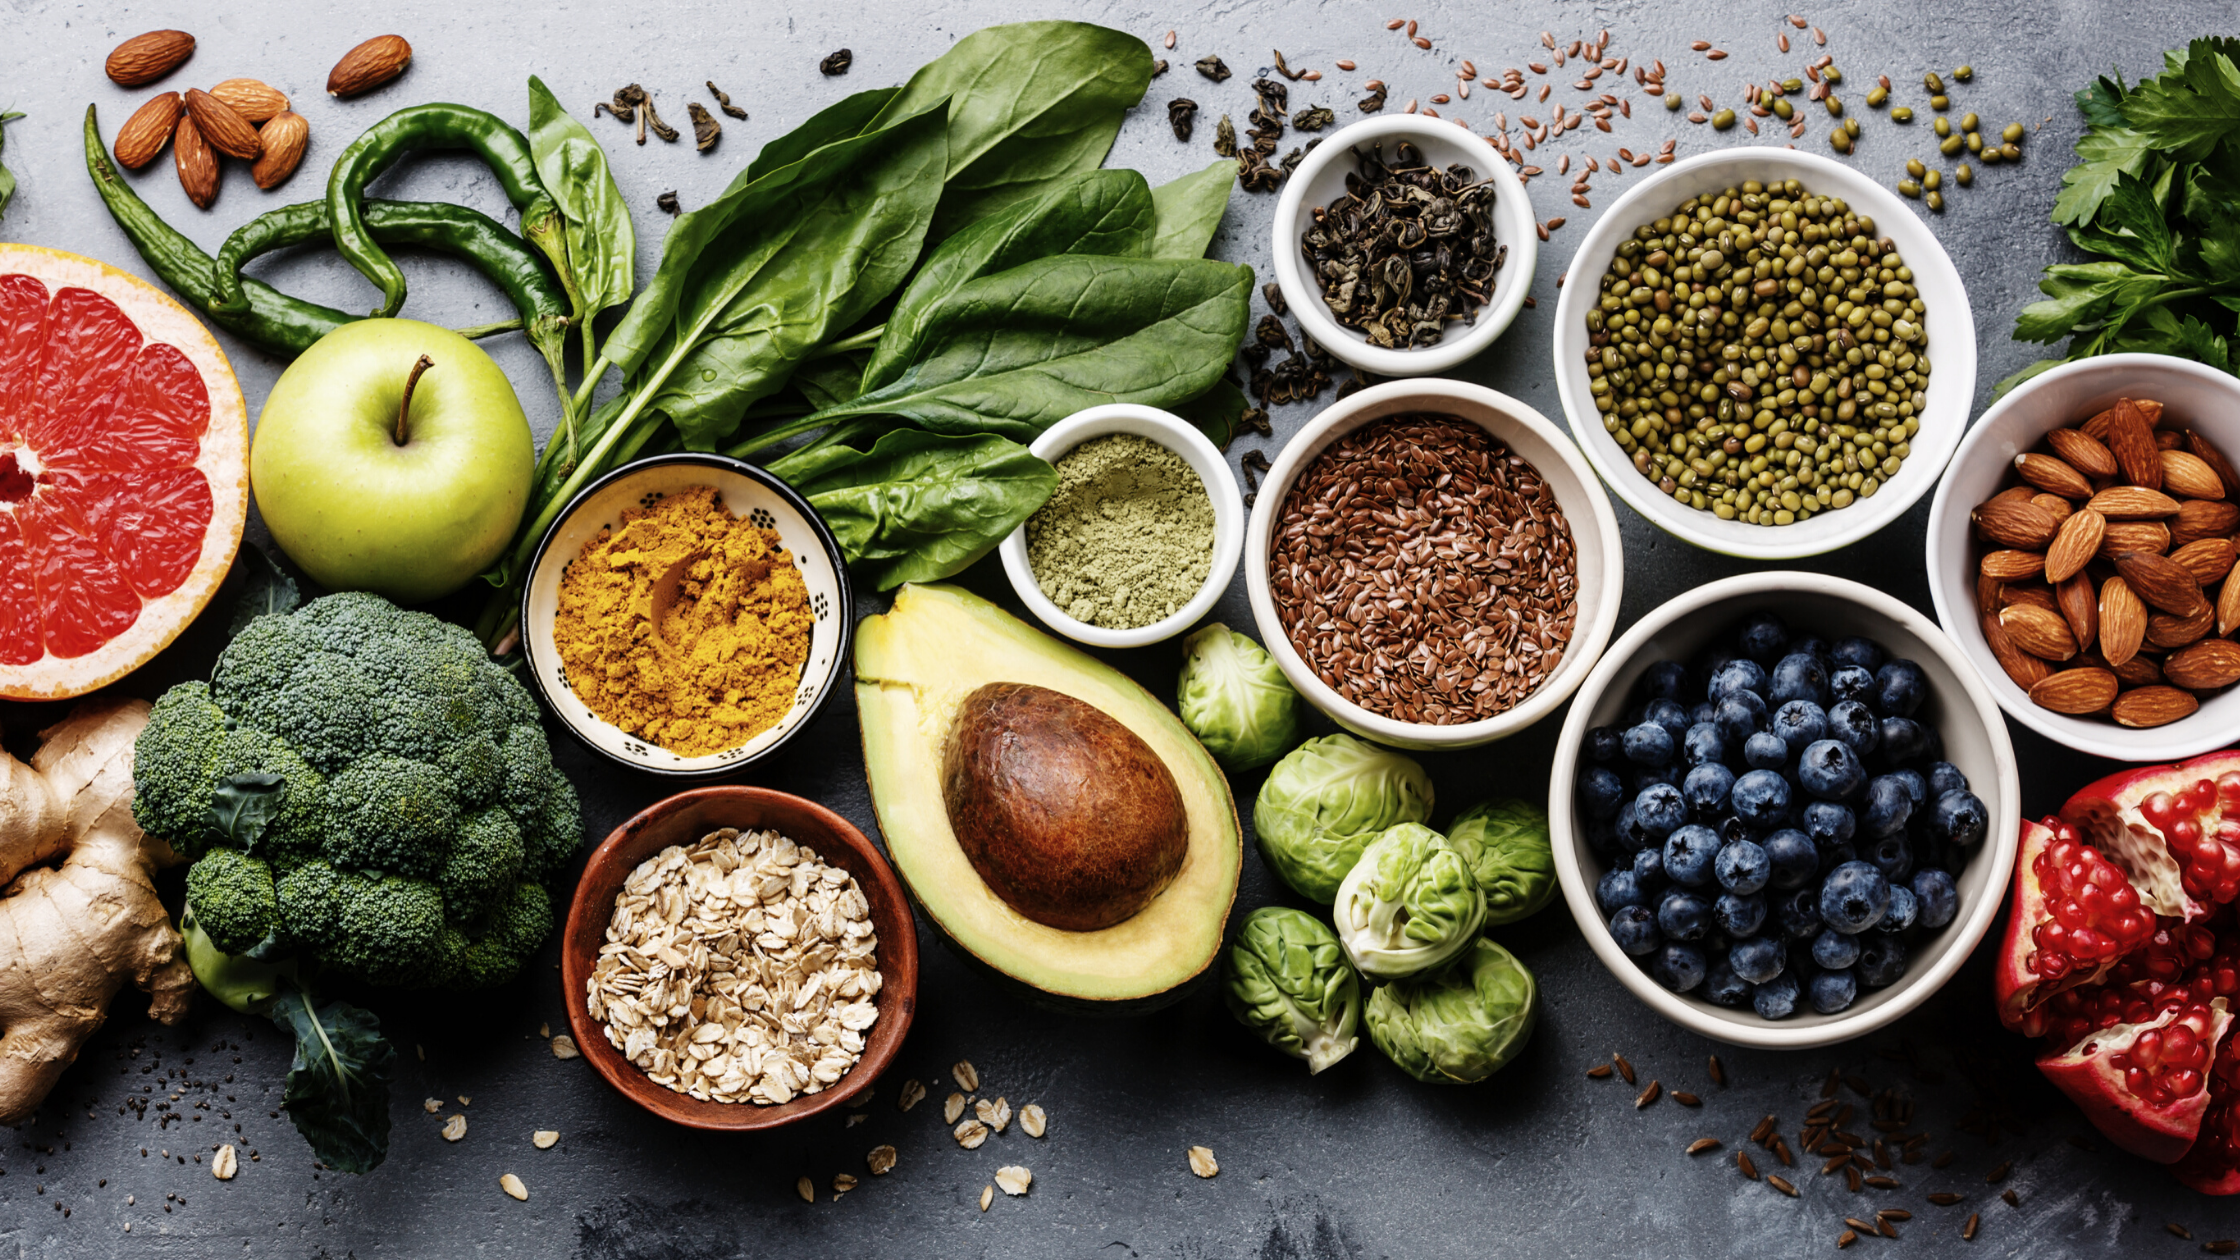 Superfood or Super Fad: Should You Be Adding Superfoods To Your Clients' Nutrition Plans?